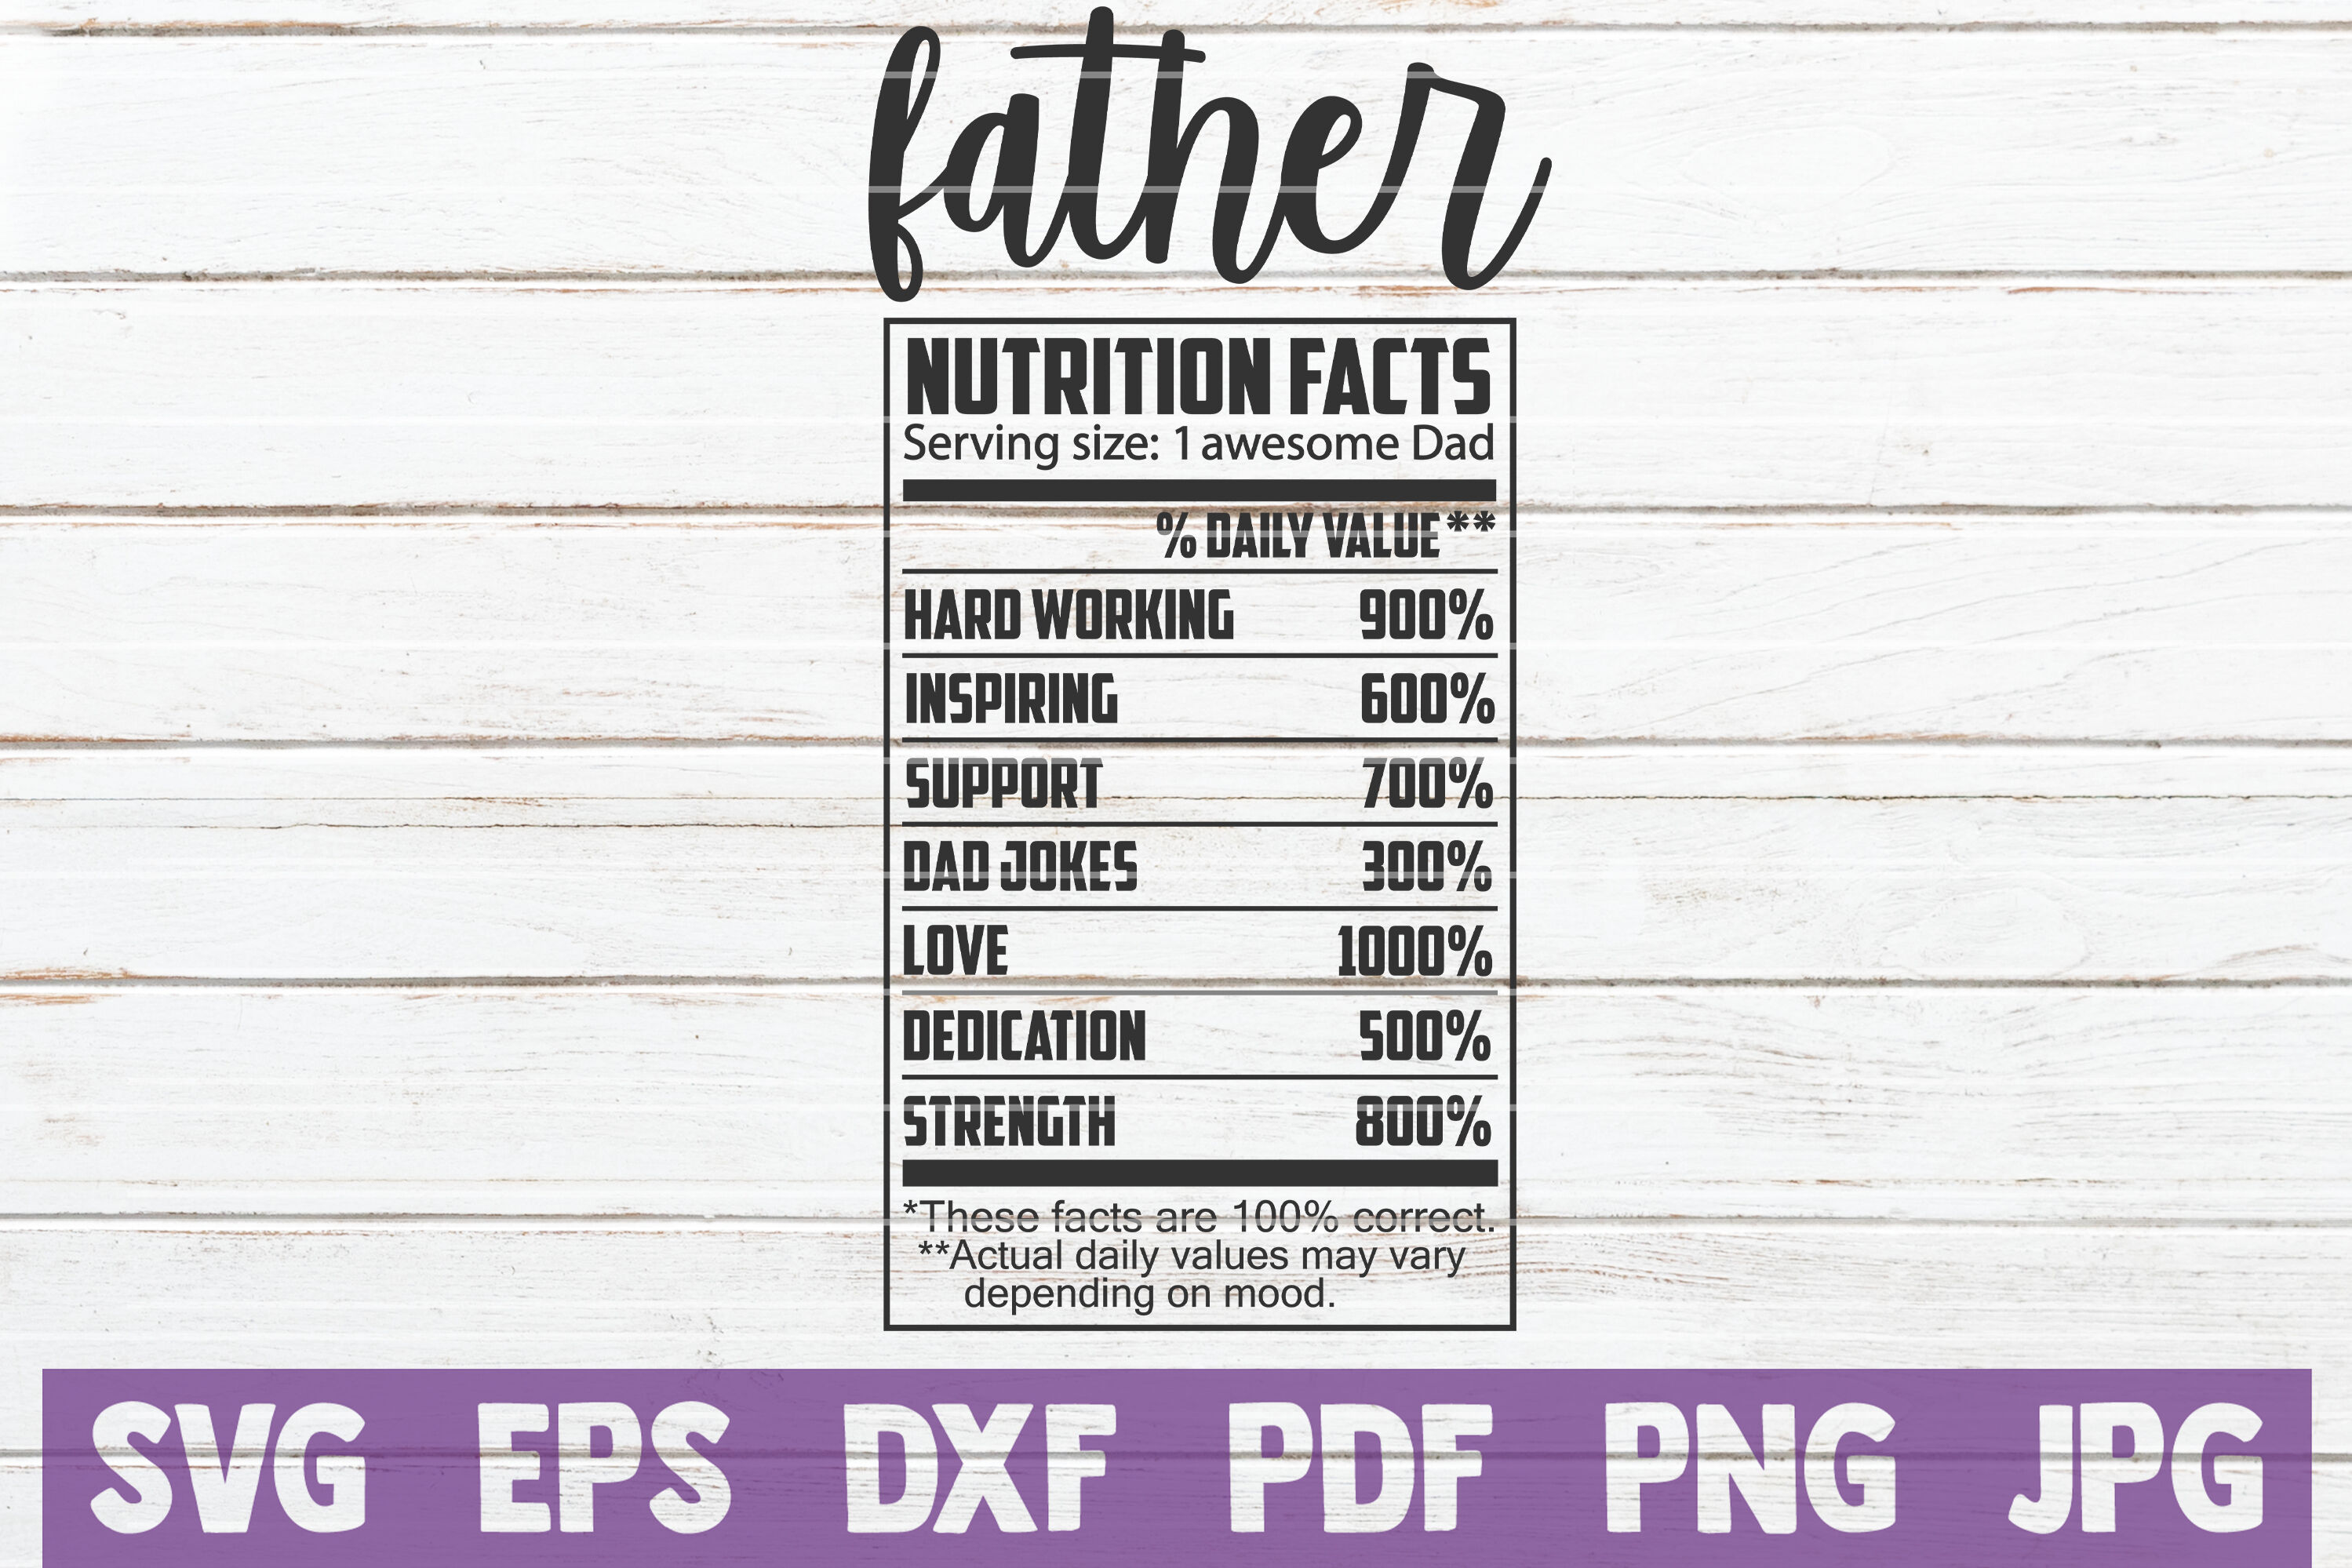 Download Father Nutrition Facts Svg Cut File By Mintymarshmallows Thehungryjpeg Com